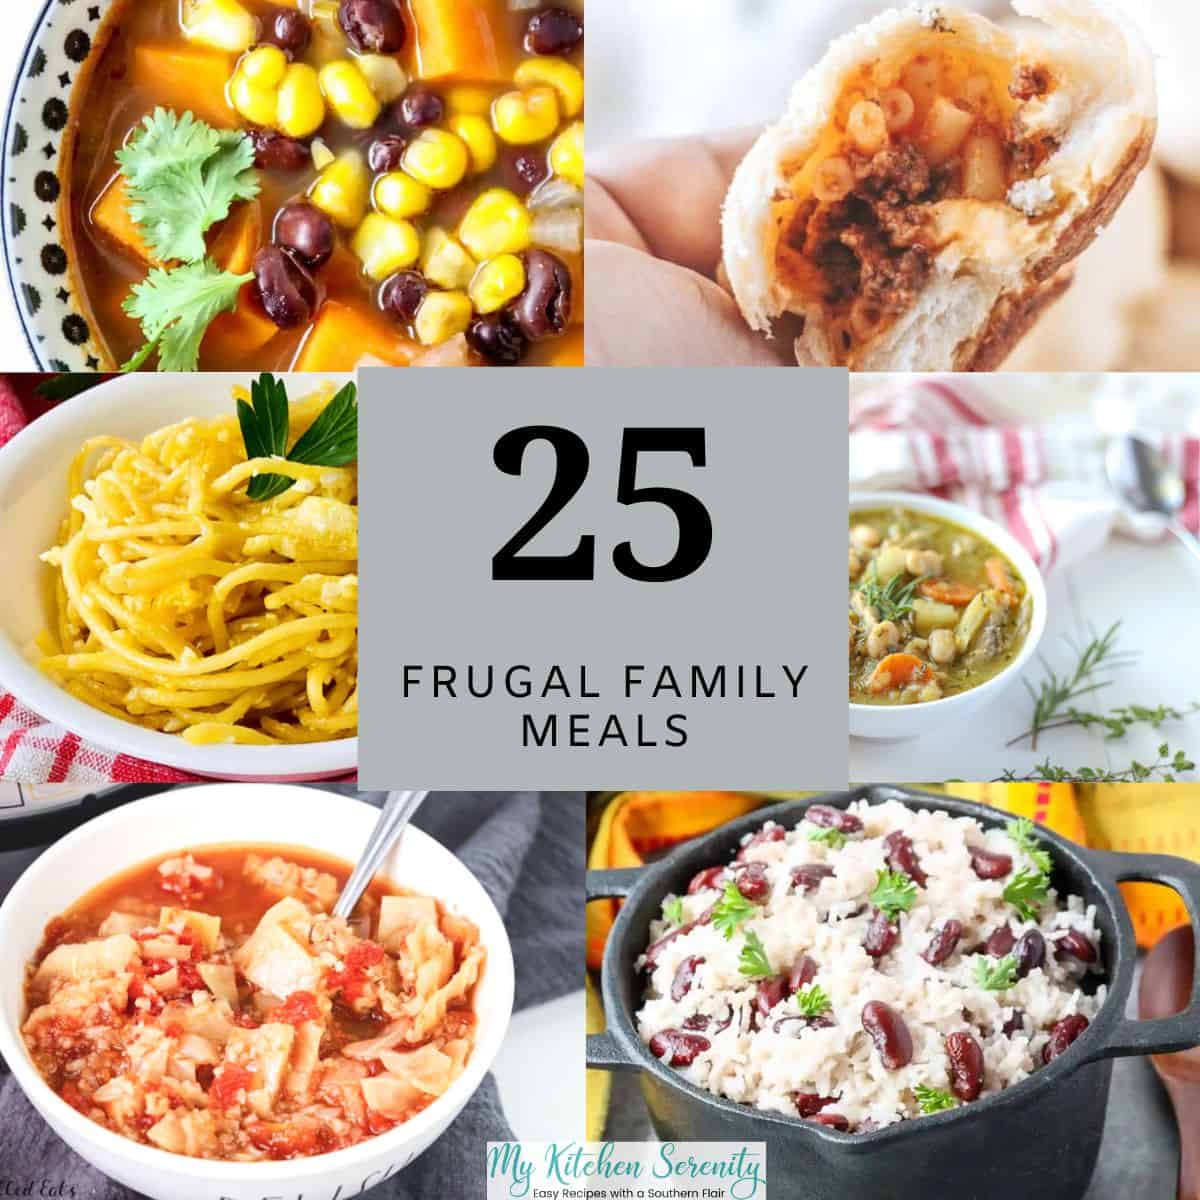 Frugal Family Meals - My Kitchen Serenity